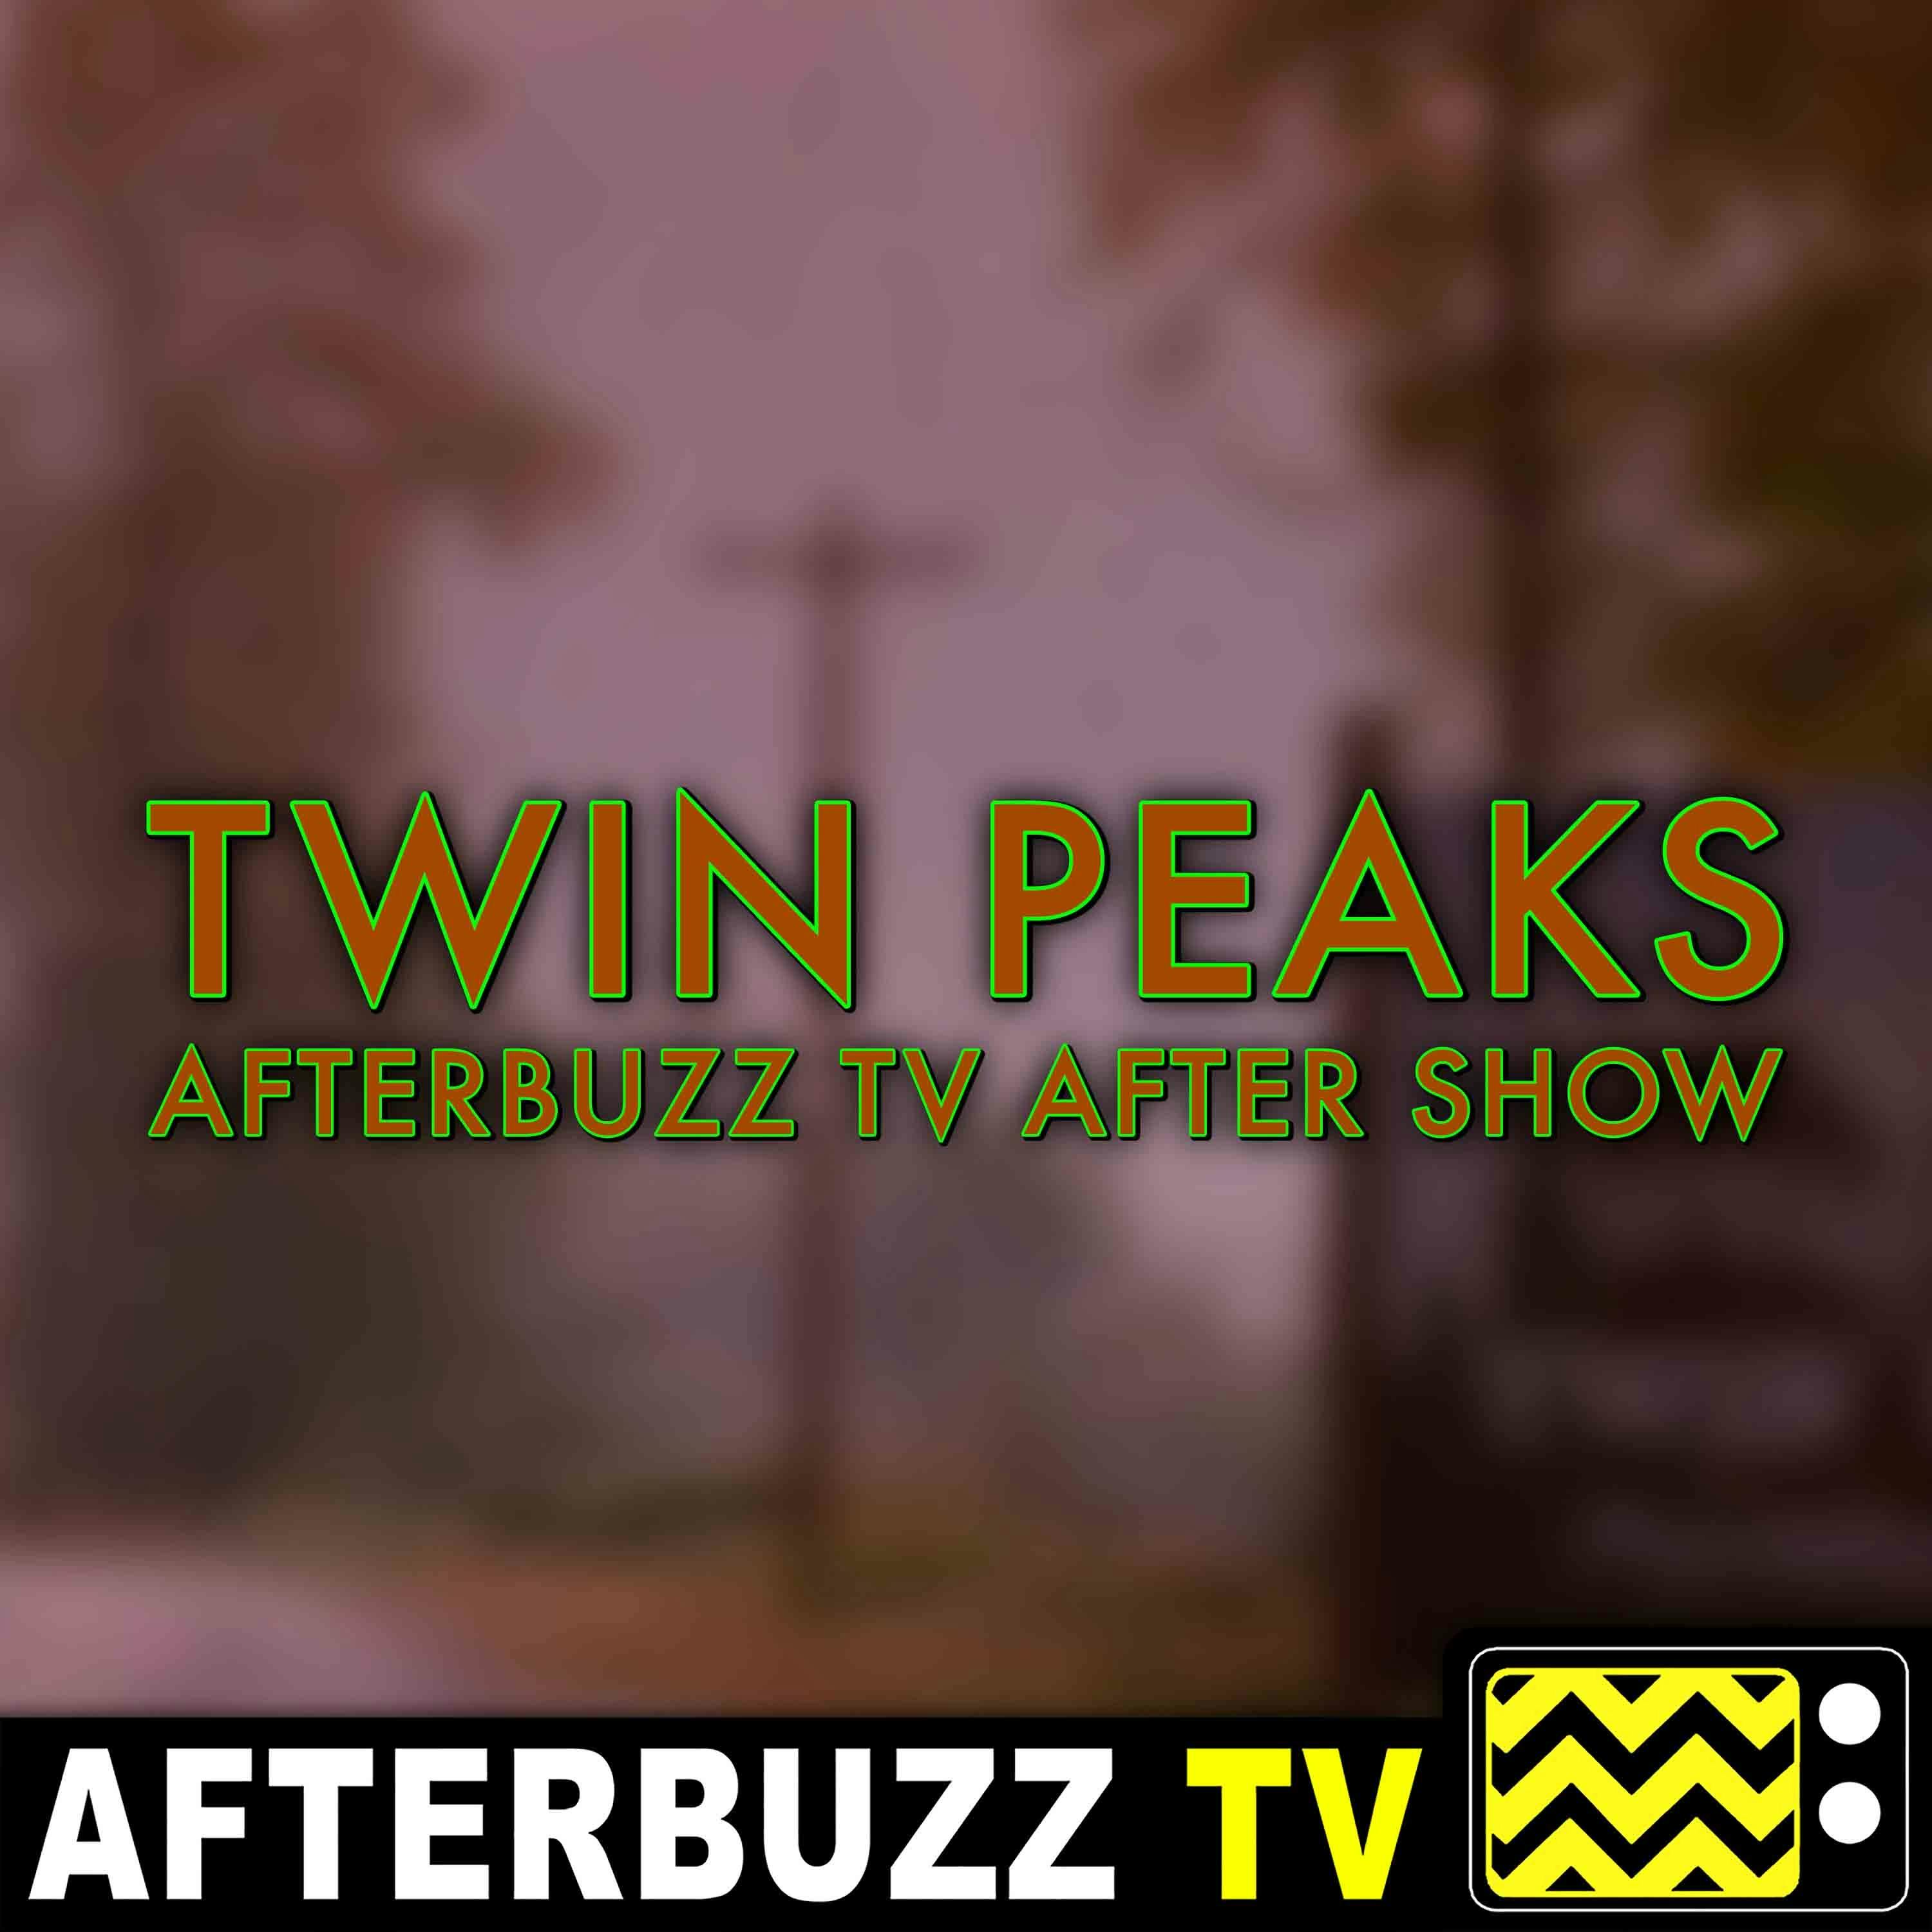 Twin Peaks S:1 | The Return: Part 7 E:7 | AfterBuzz TV AfterShow